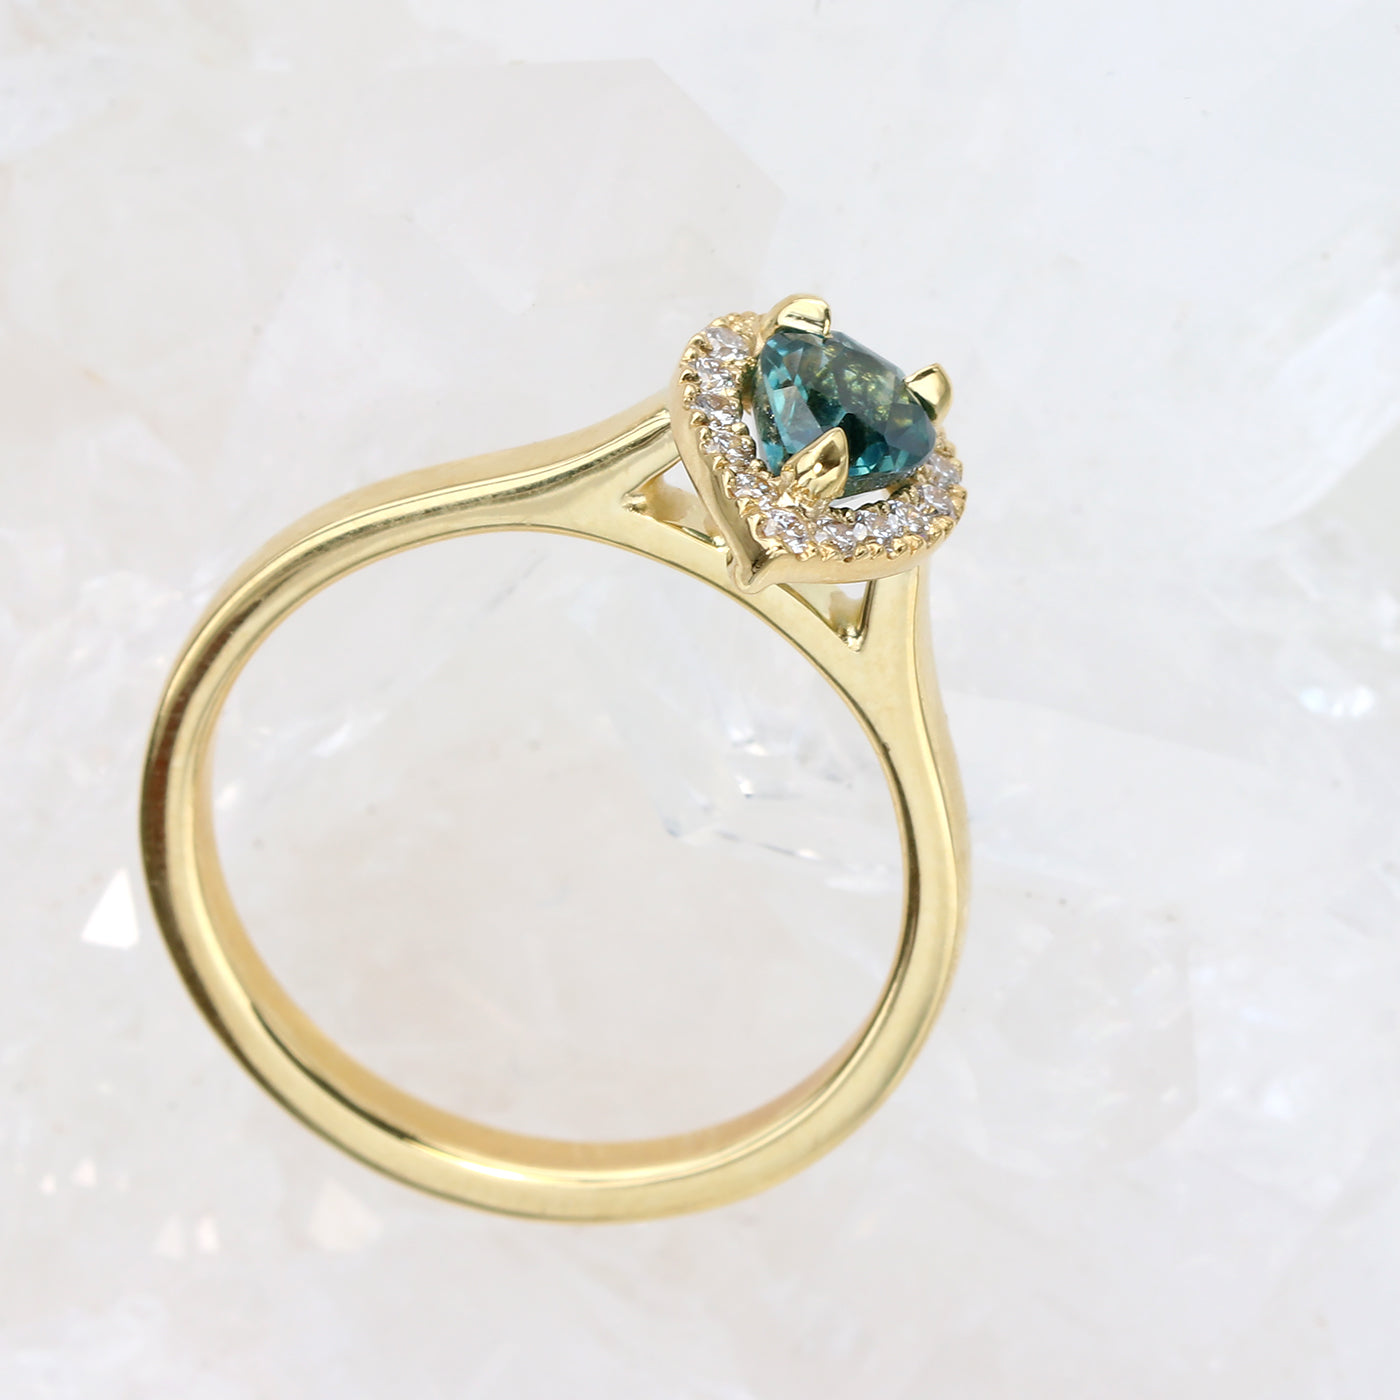 Teal Sapphire and Diamond Halo Engagement Ring in 18ct Gold